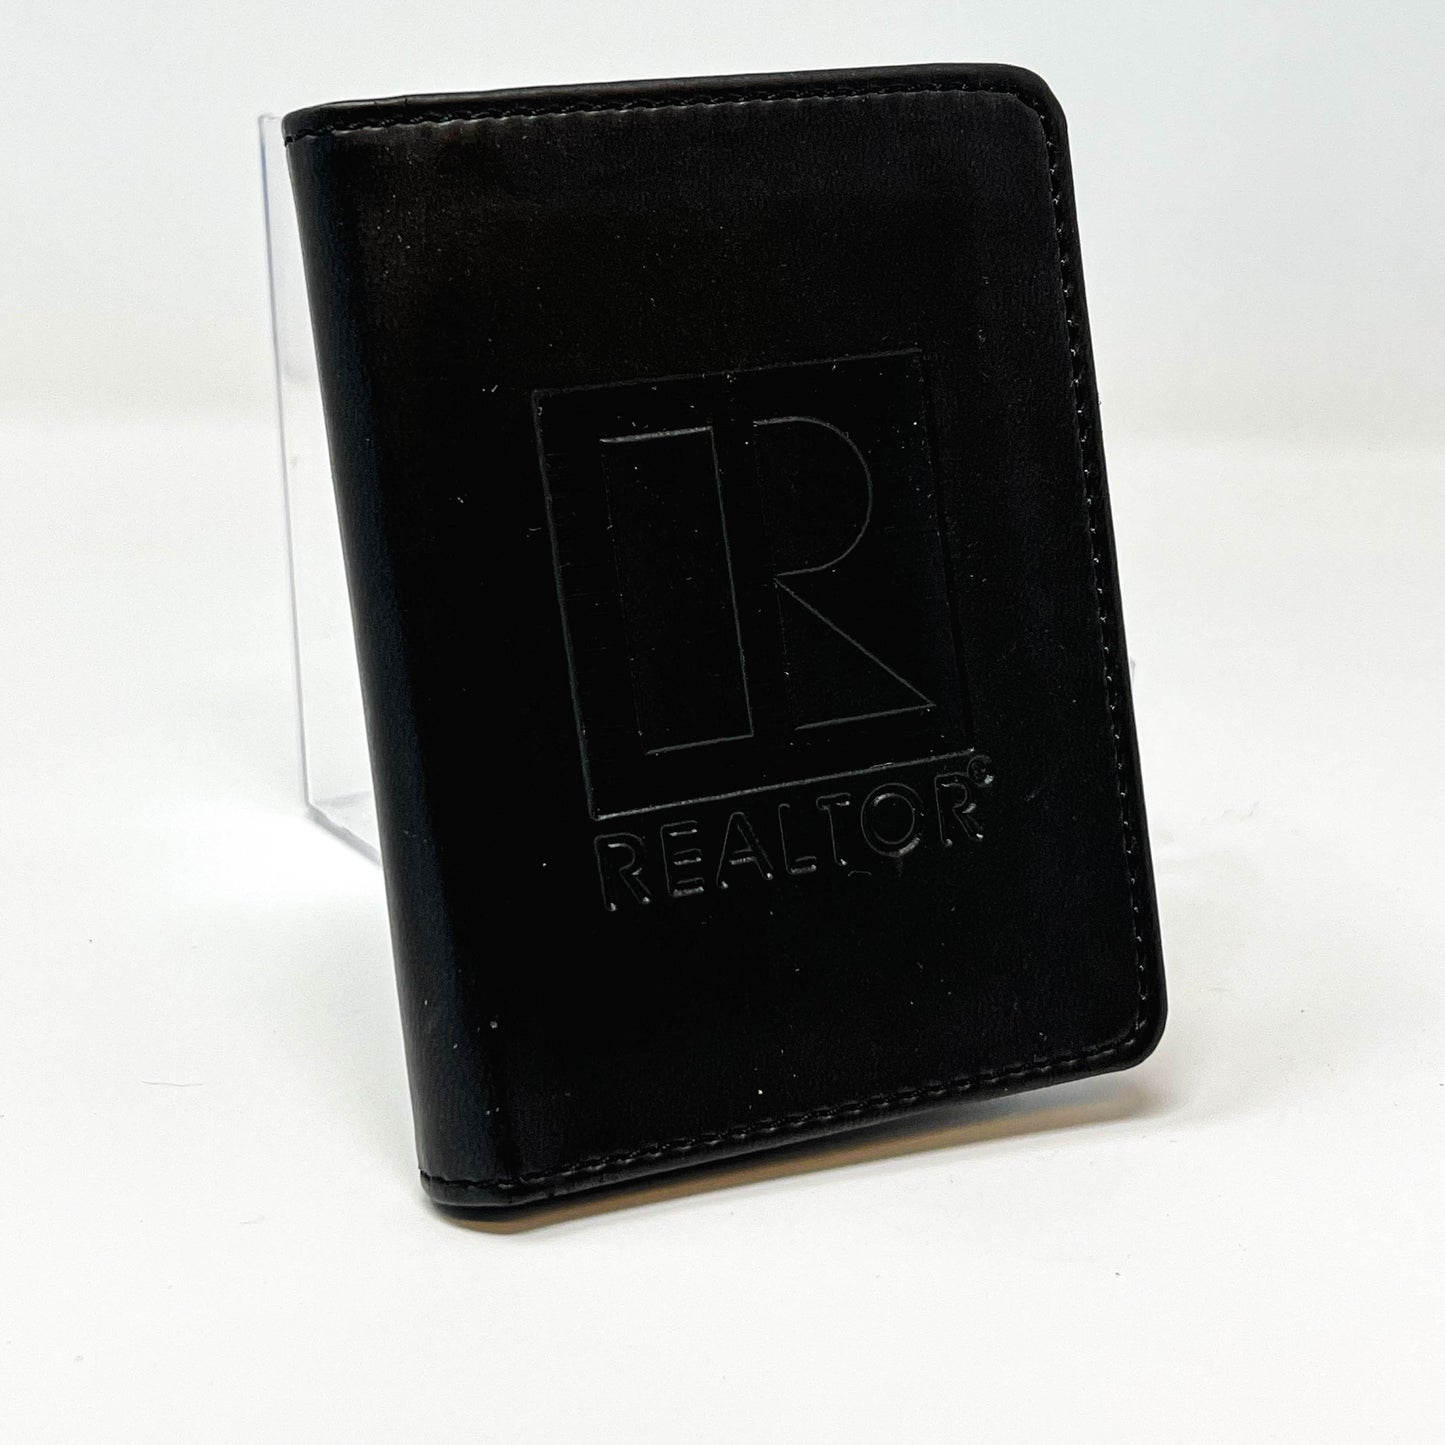 Wallet Black fold wallet leather like material embossed REALTOR branded logo on front holds 24 cards (24CW)